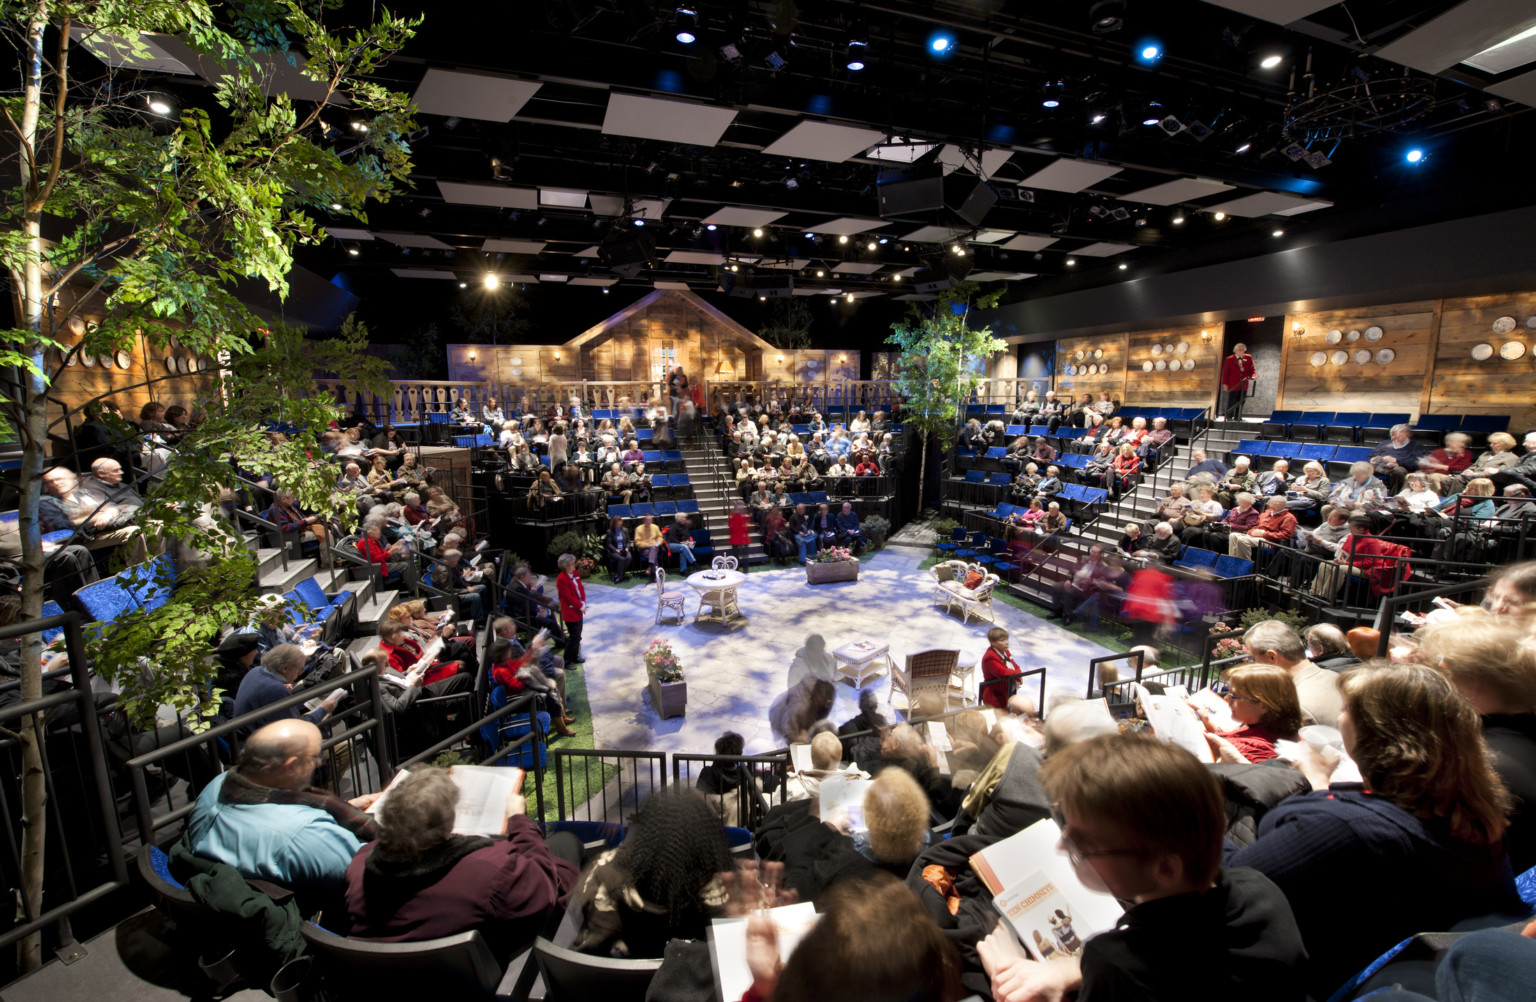 people seated at theater in the round with trees off a stage set with white table and chairs, textural lighting from above